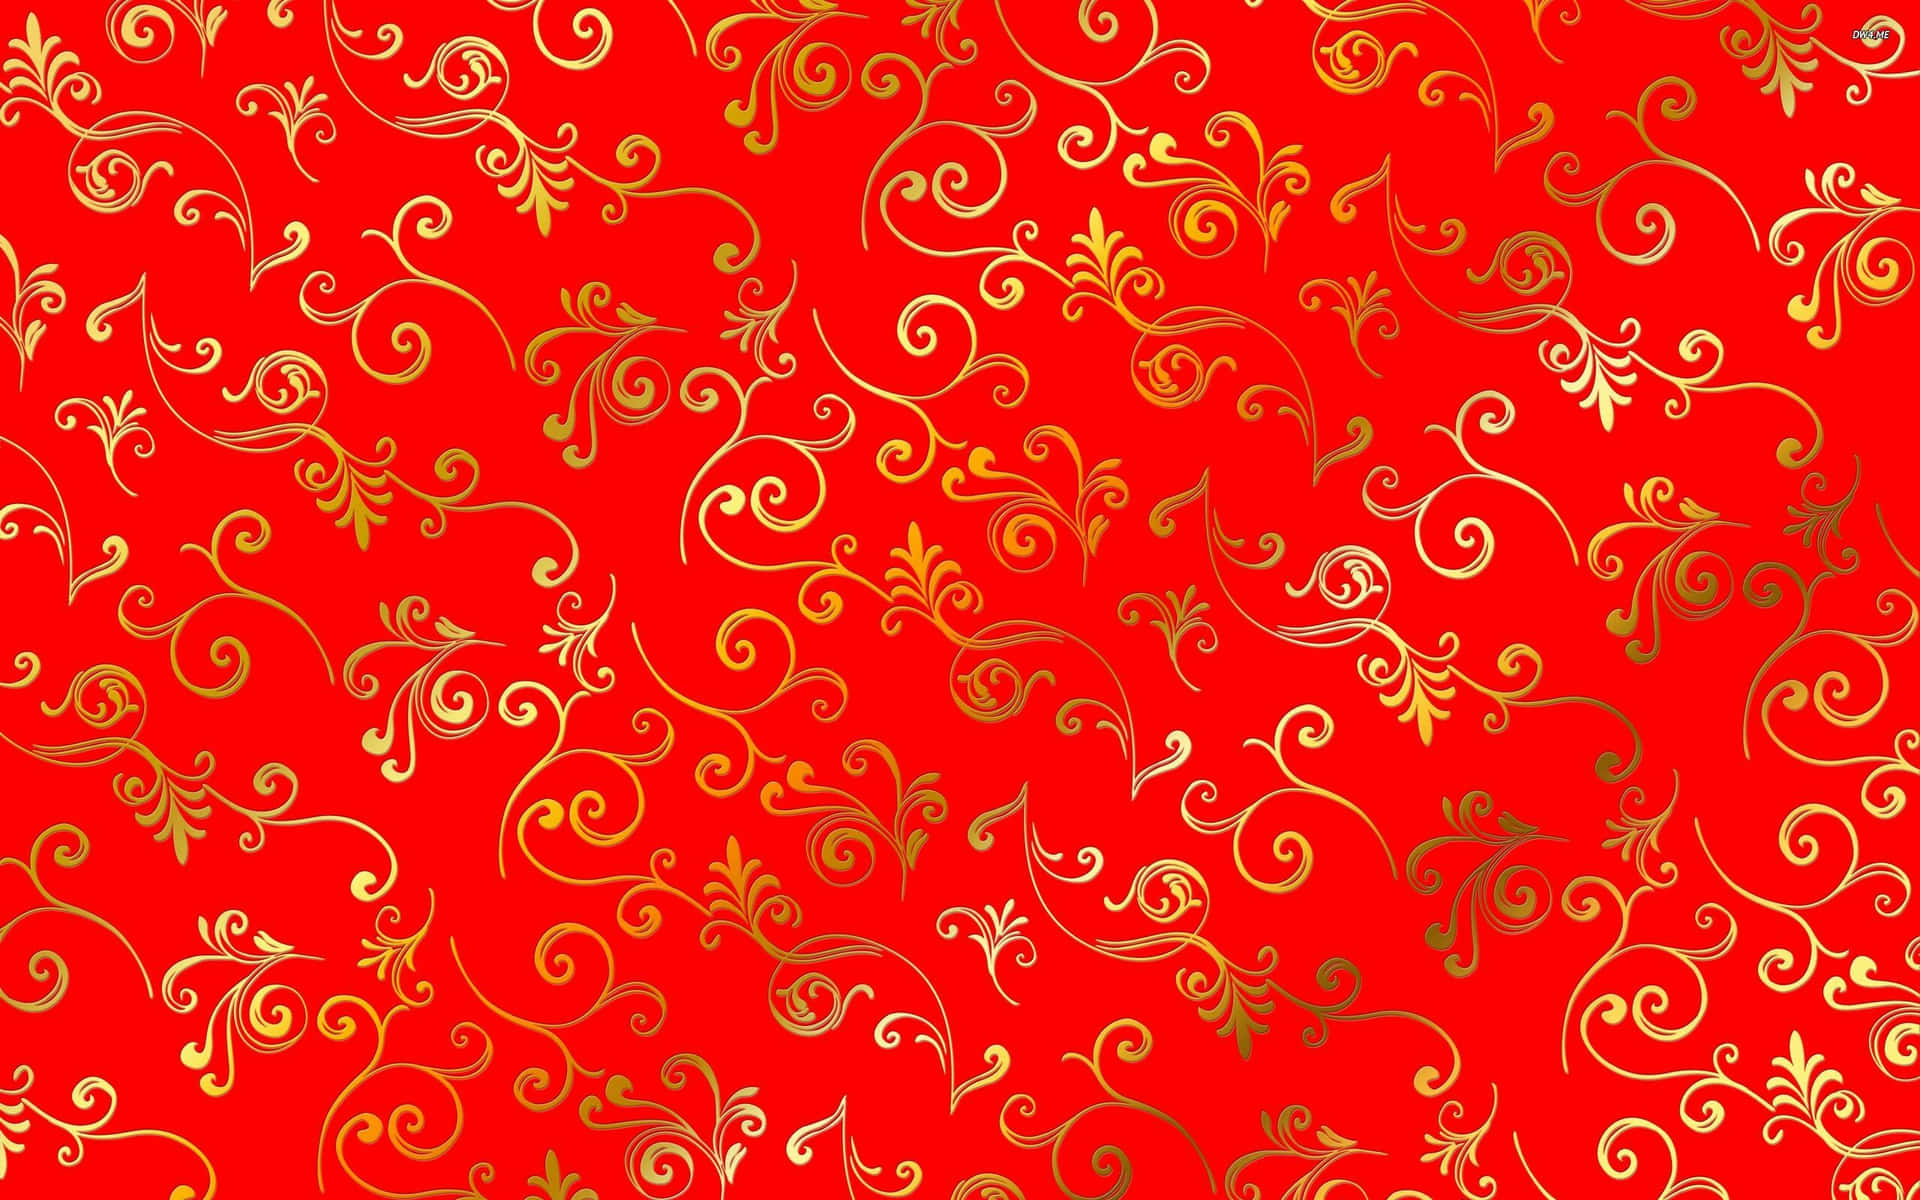 Red and gold-- a glamorous, powerful style Wallpaper